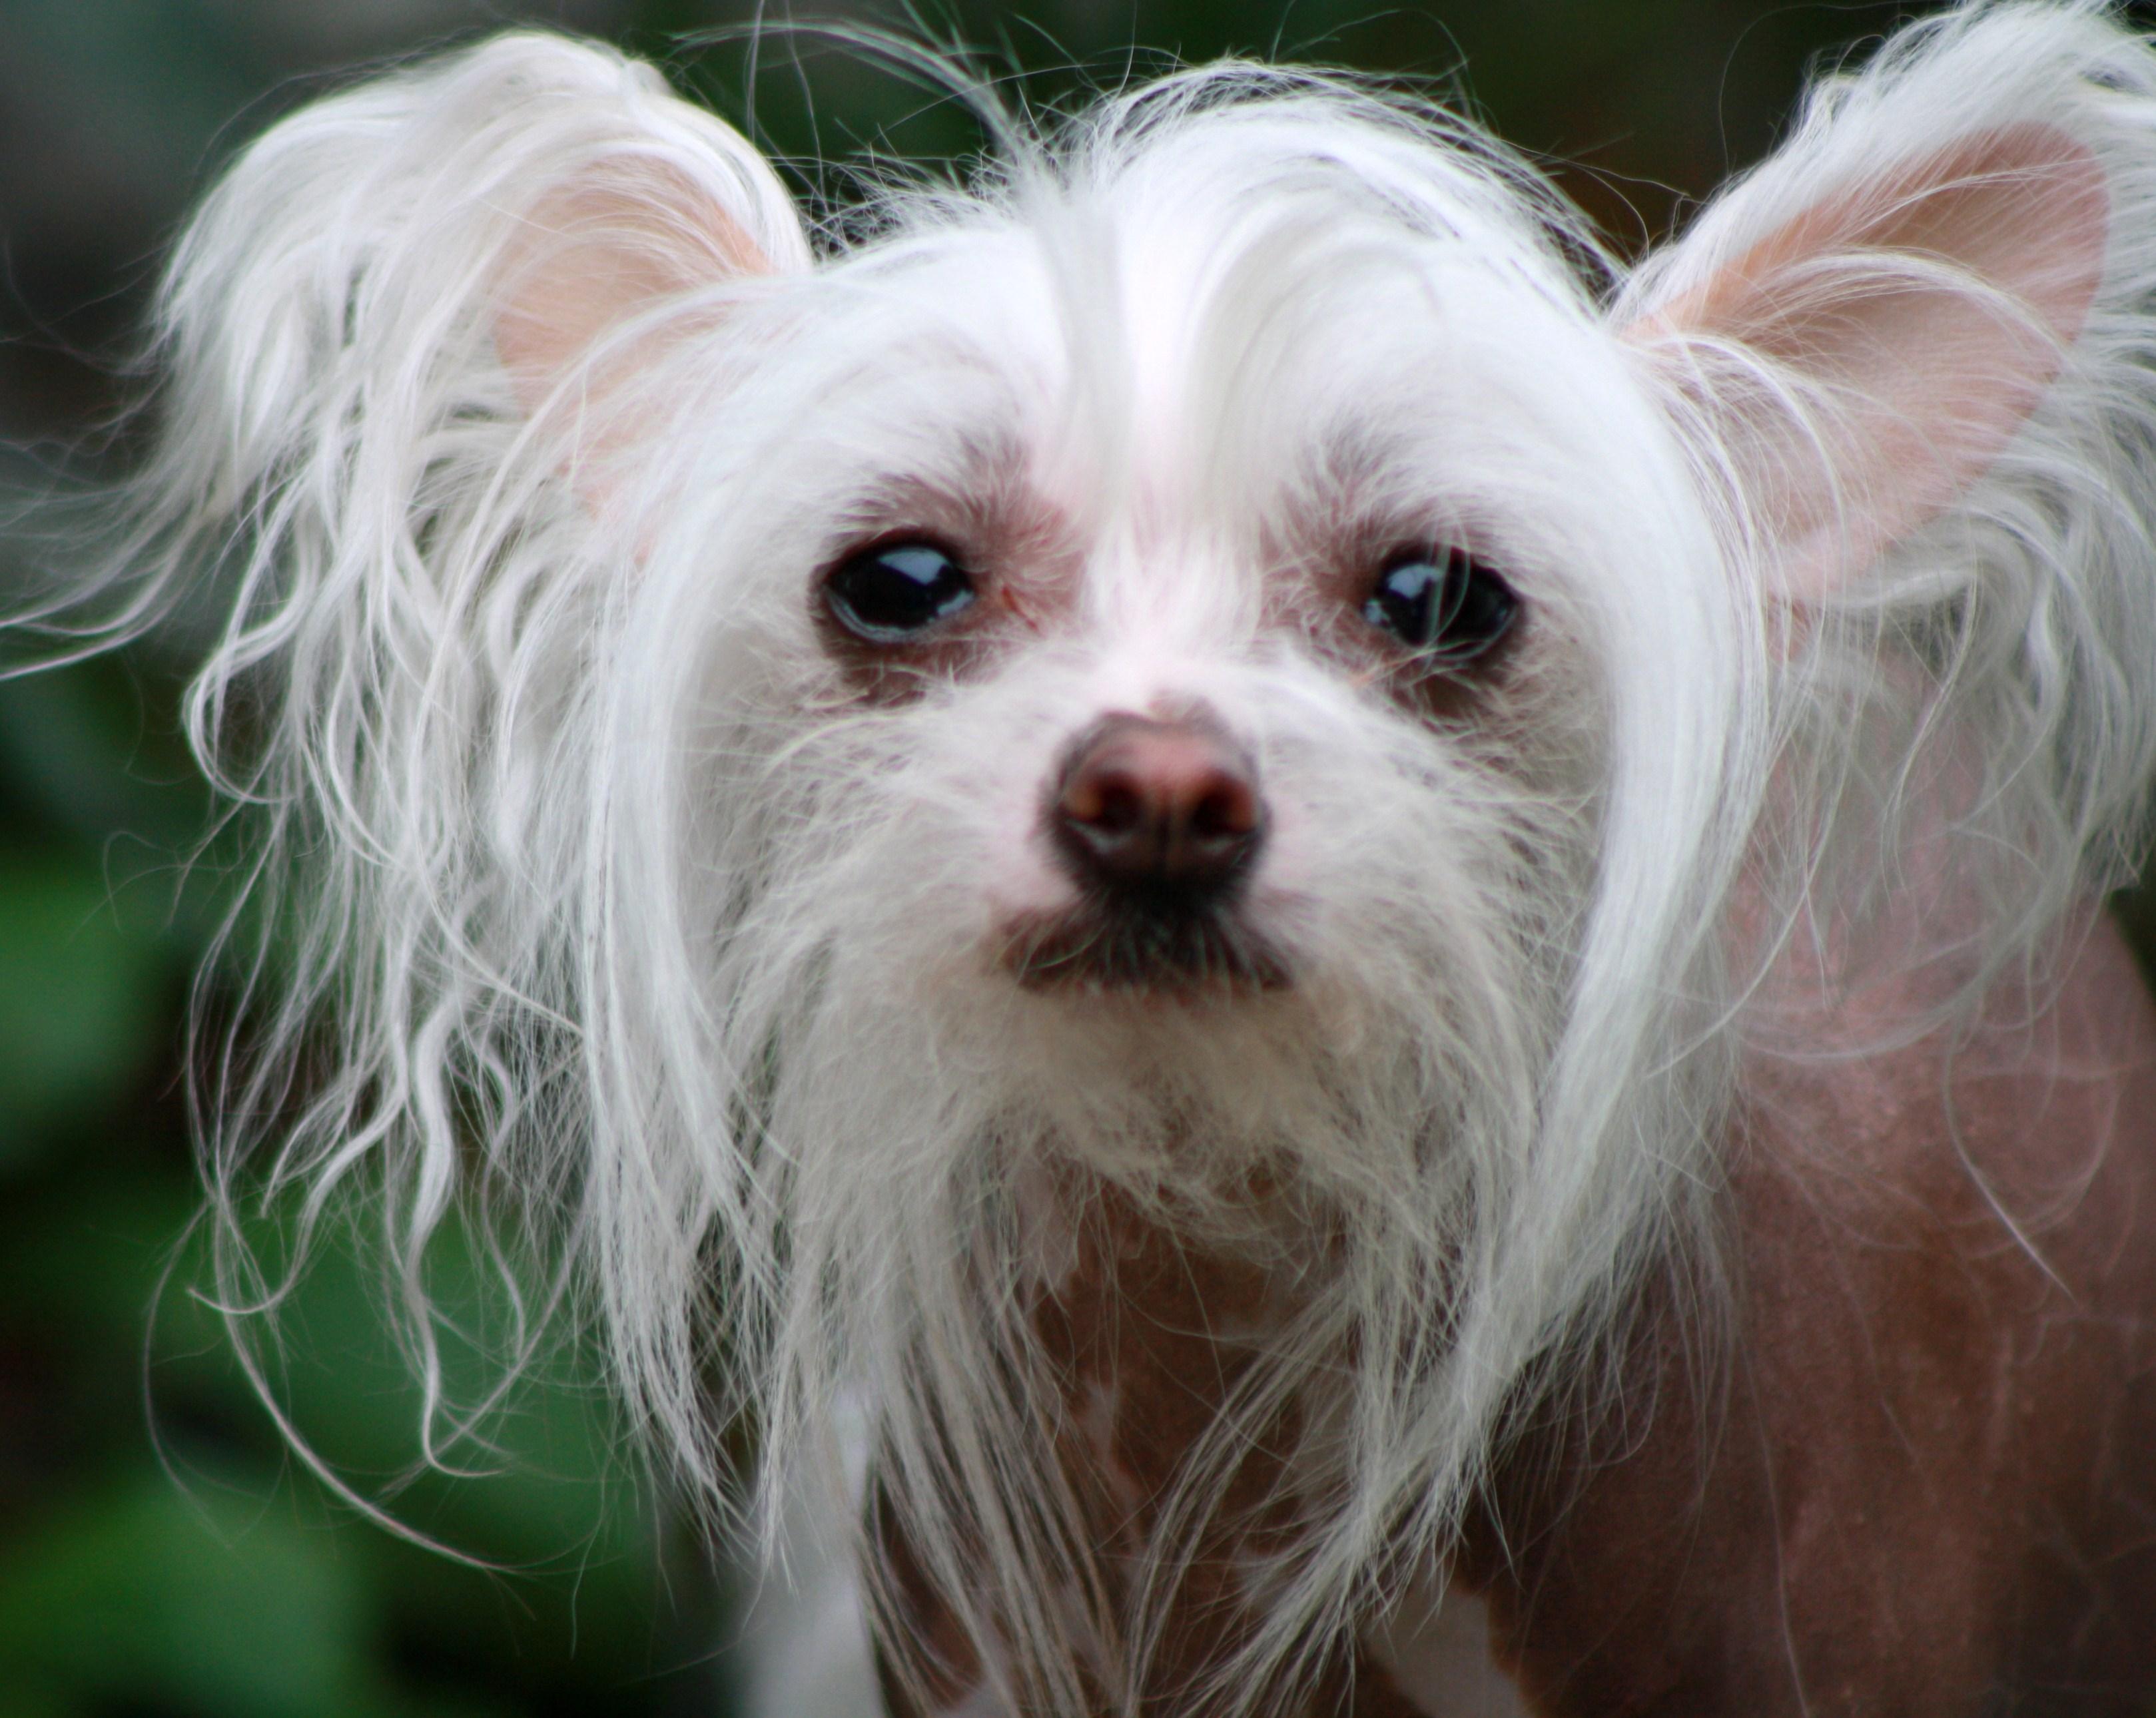 Chinese Crested dog photo and wallpaper Beautiful Chinese Crested